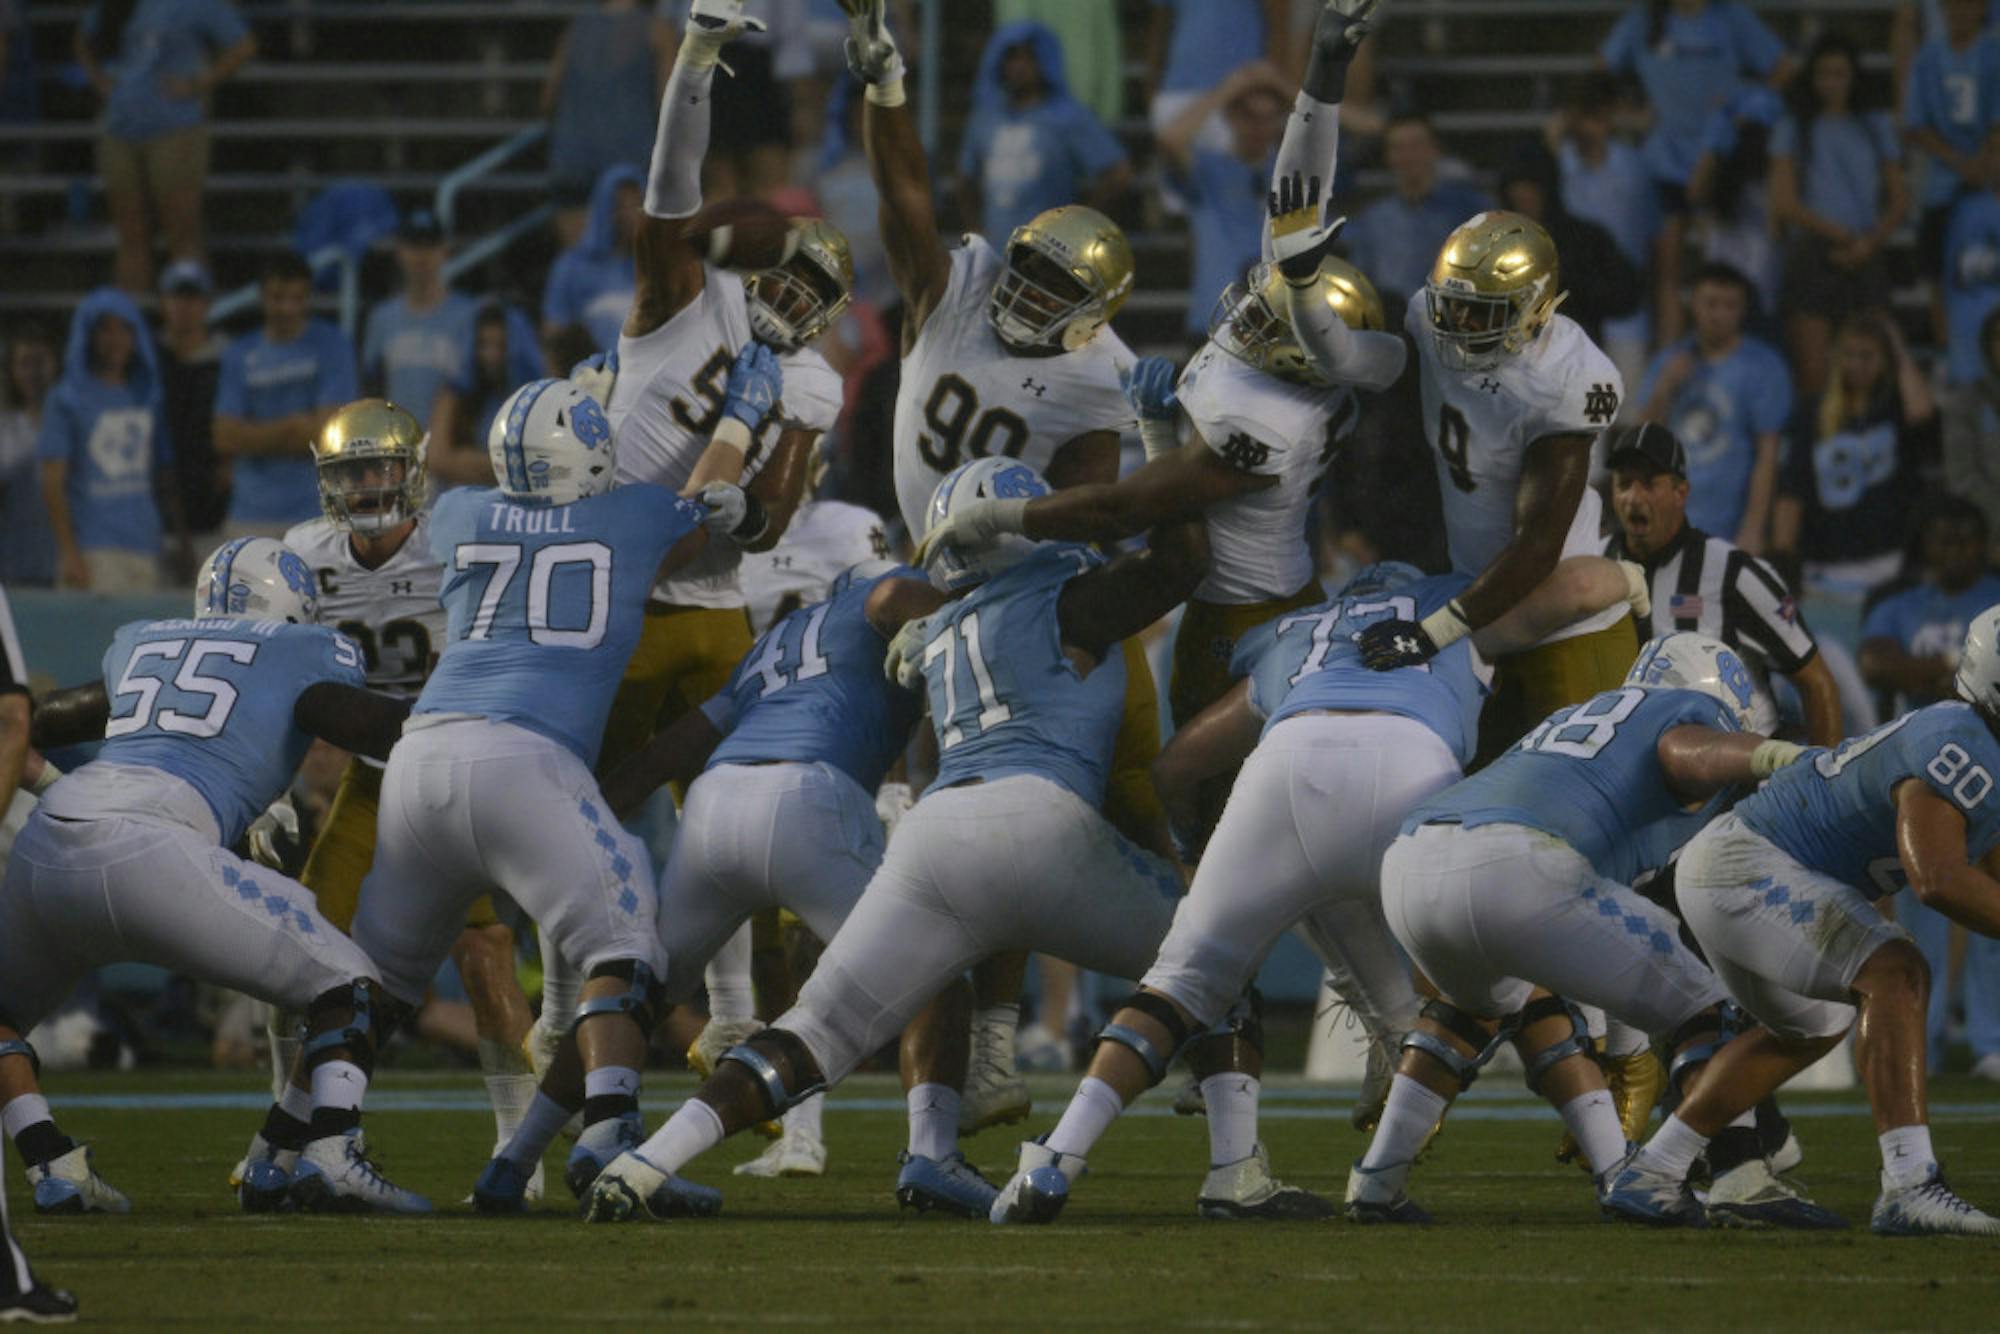 Irish junior defensive lineman Jerry Tillery, middle, and the Irish defensive line attempt to block an extra-point attempt during Notre Dame's 33-10 win over North Carolina on Saturday at Kenan Memorial Stadium in Chapel Hill, North Carolina.